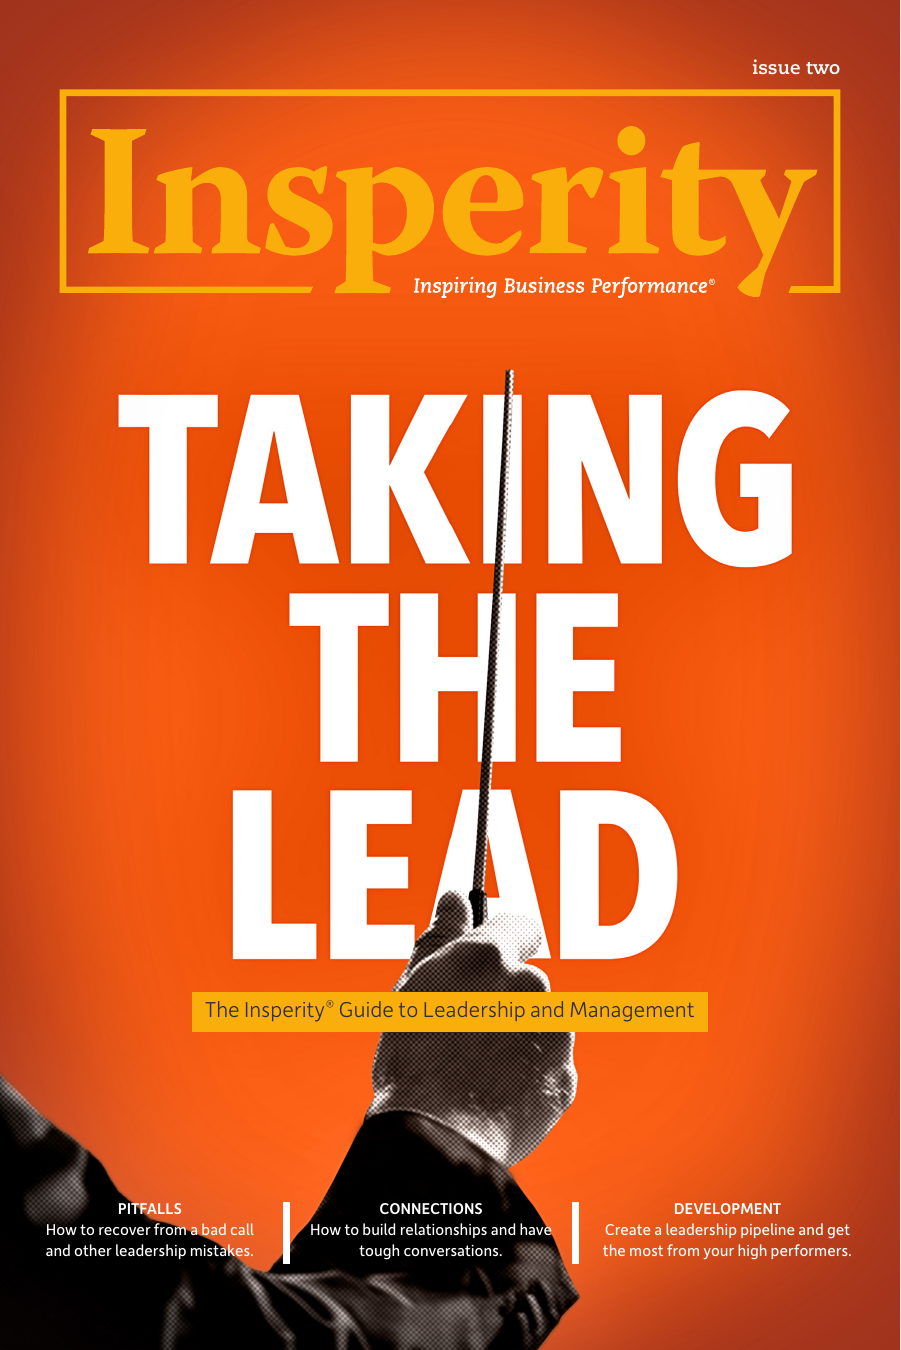 Page 1 of 7 - Insperity-the-insperity-guide-to-leadership-and-management-issue-2